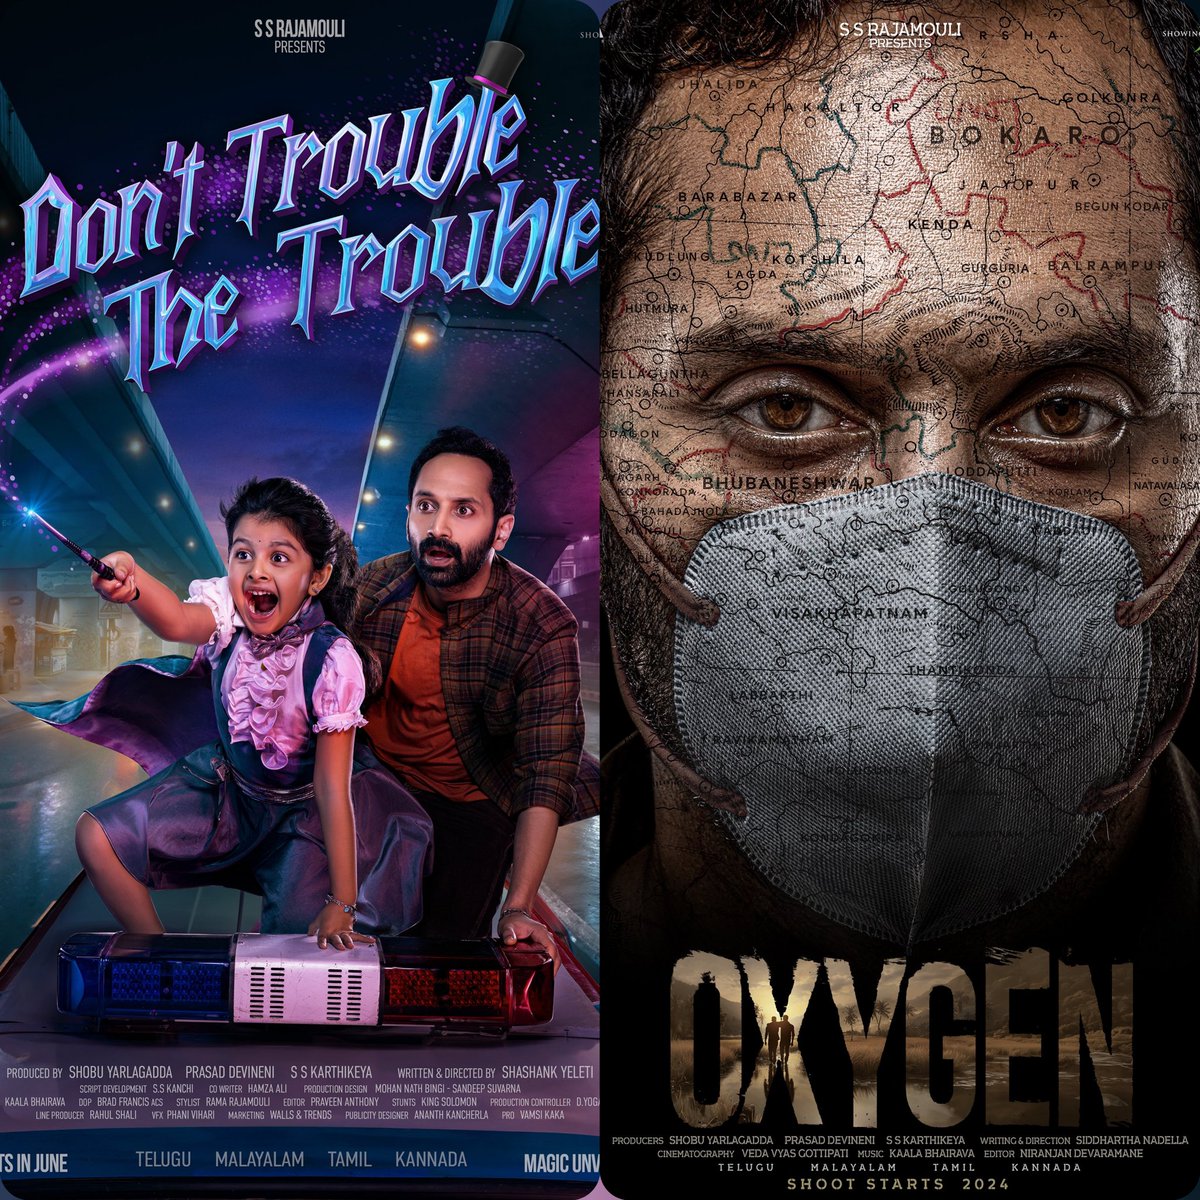 We got two #FahadhFaasil film announcements.

What a day! 🔥

#DontTroubleTheTrouble #Oxygen